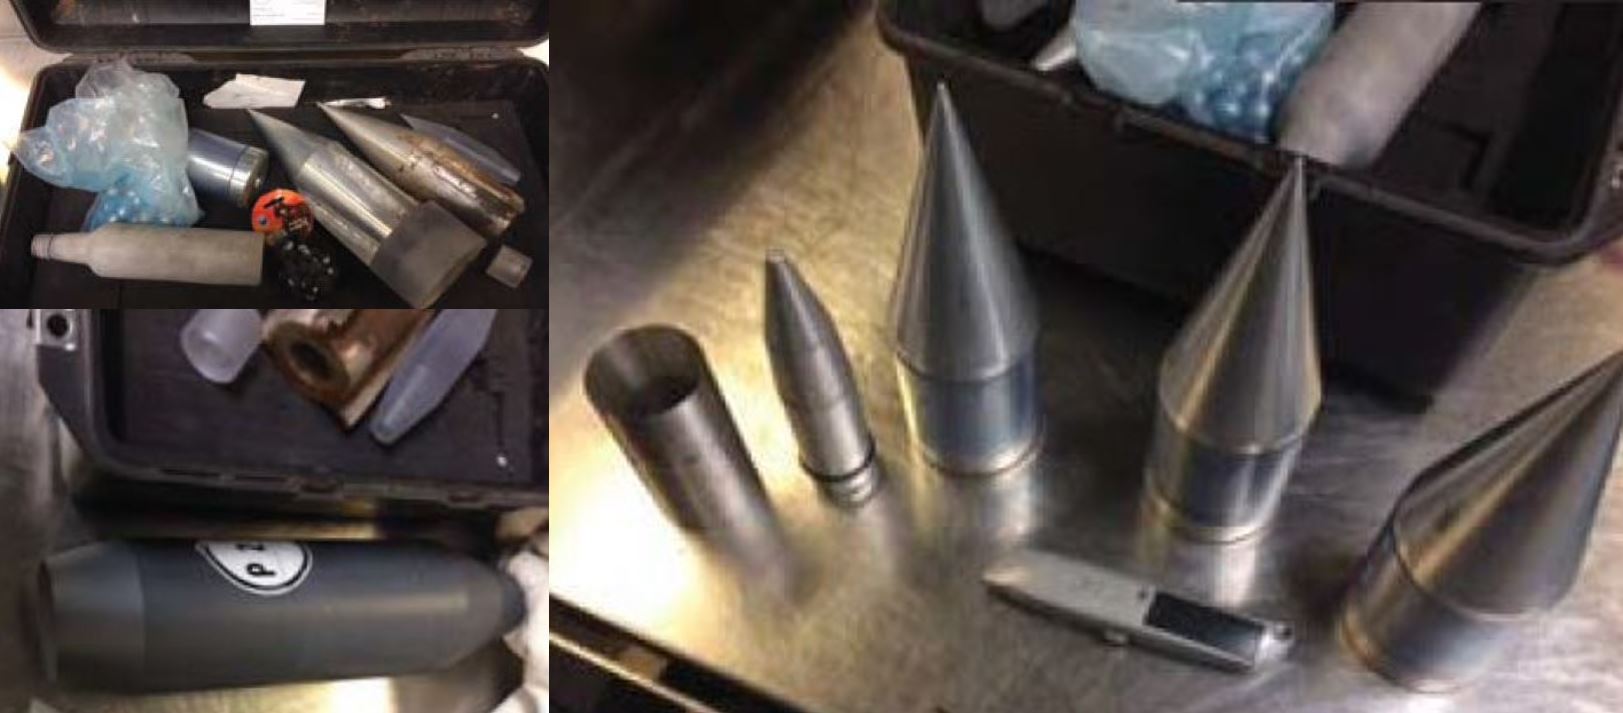 Inert prototype projectile munitions for energetic drilling were discovered in a checked bag at Spokane (GEG). 